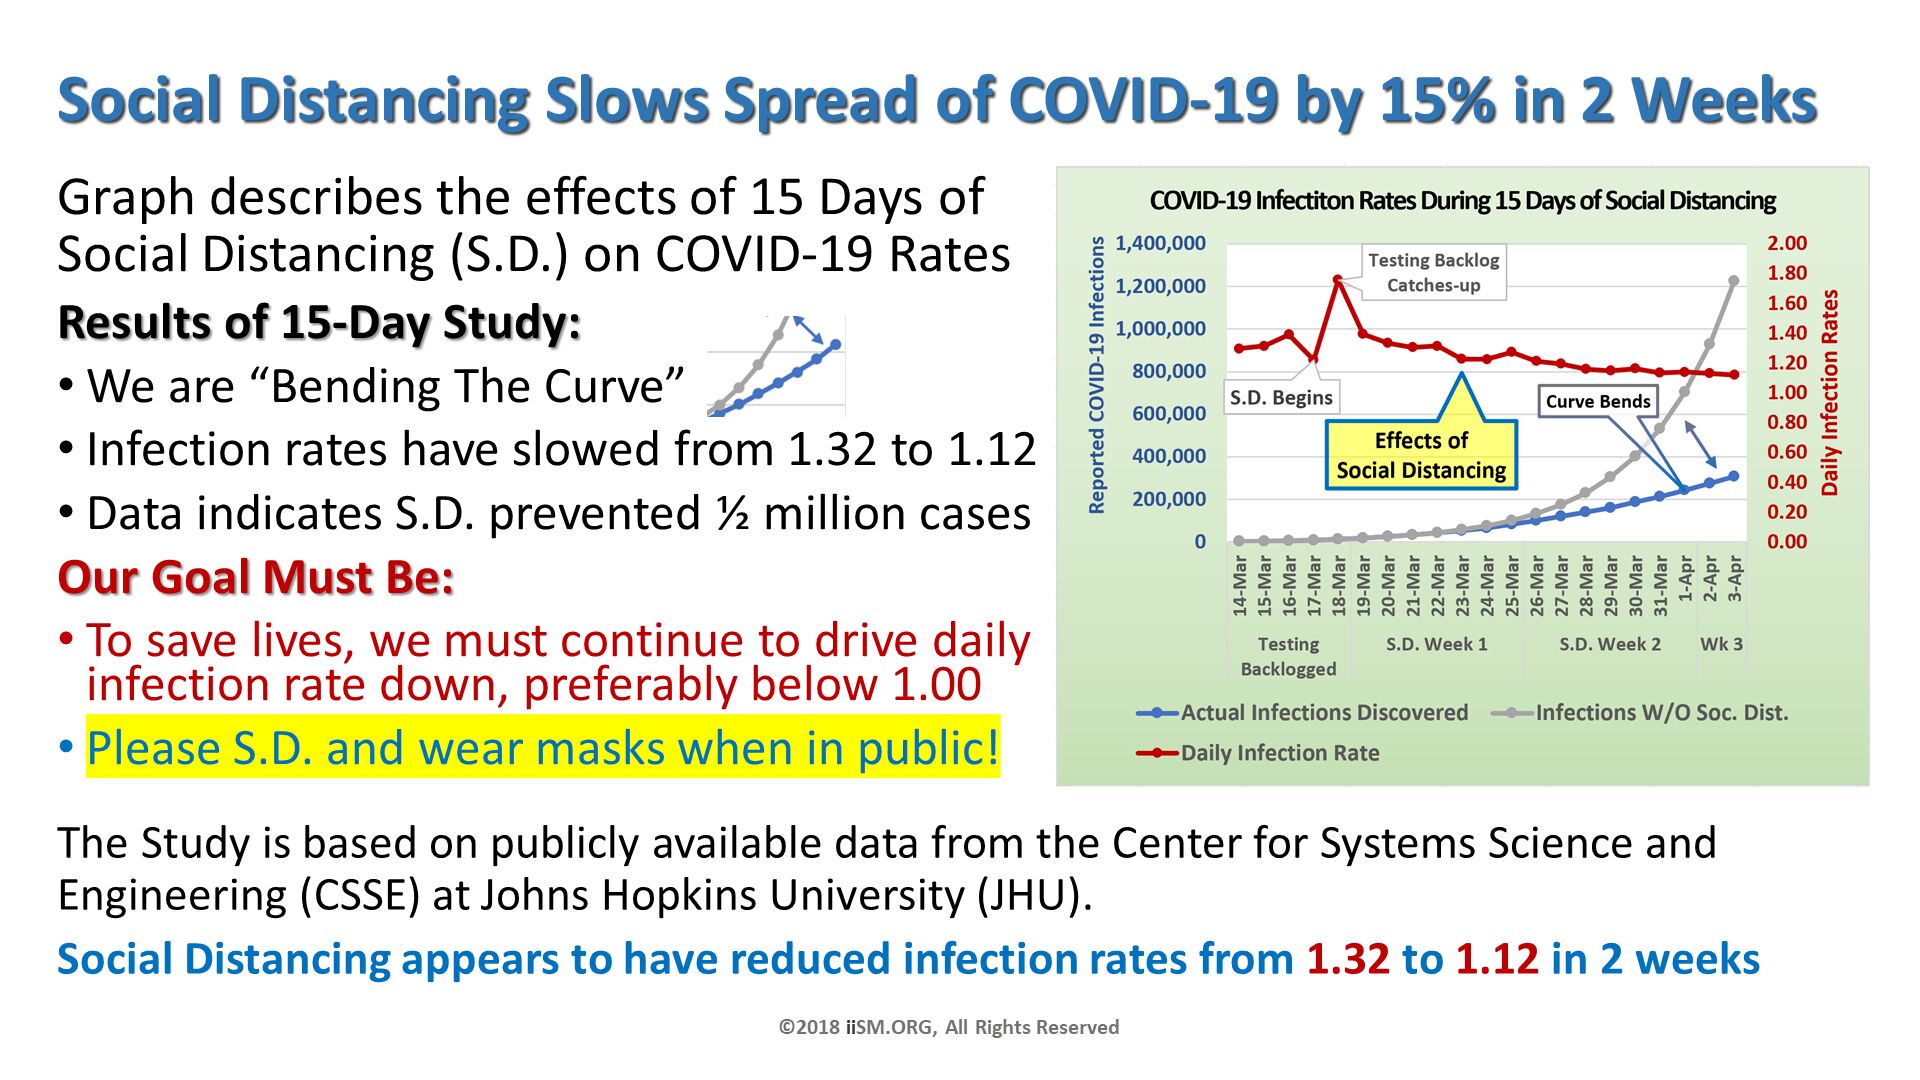 Social Distancing Slows Spread of COVID-19 by 15% in 2 Weeks . Graph describes the effects of 15 Days of Social Distancing (S.D.) on COVID-19 Rates 
Results of 15-Day Study:
We are “Bending The Curve” 
Infection rates have slowed from 1.32 to 1.12 
Data indicates S.D. prevented ½ million cases
Our Goal Must Be:
To save lives, we must continue to drive daily infection rate down, preferably below 1.00
Please S.D. and wear masks when in public!. ©2018 iiSM.ORG, All Rights Reserved. The Study is based on publicly available data from the Center for Systems Science and Engineering (CSSE) at Johns Hopkins University (JHU).
Social Distancing appears to have reduced infection rates from 1.32 to 1.12 in 2 weeks. 